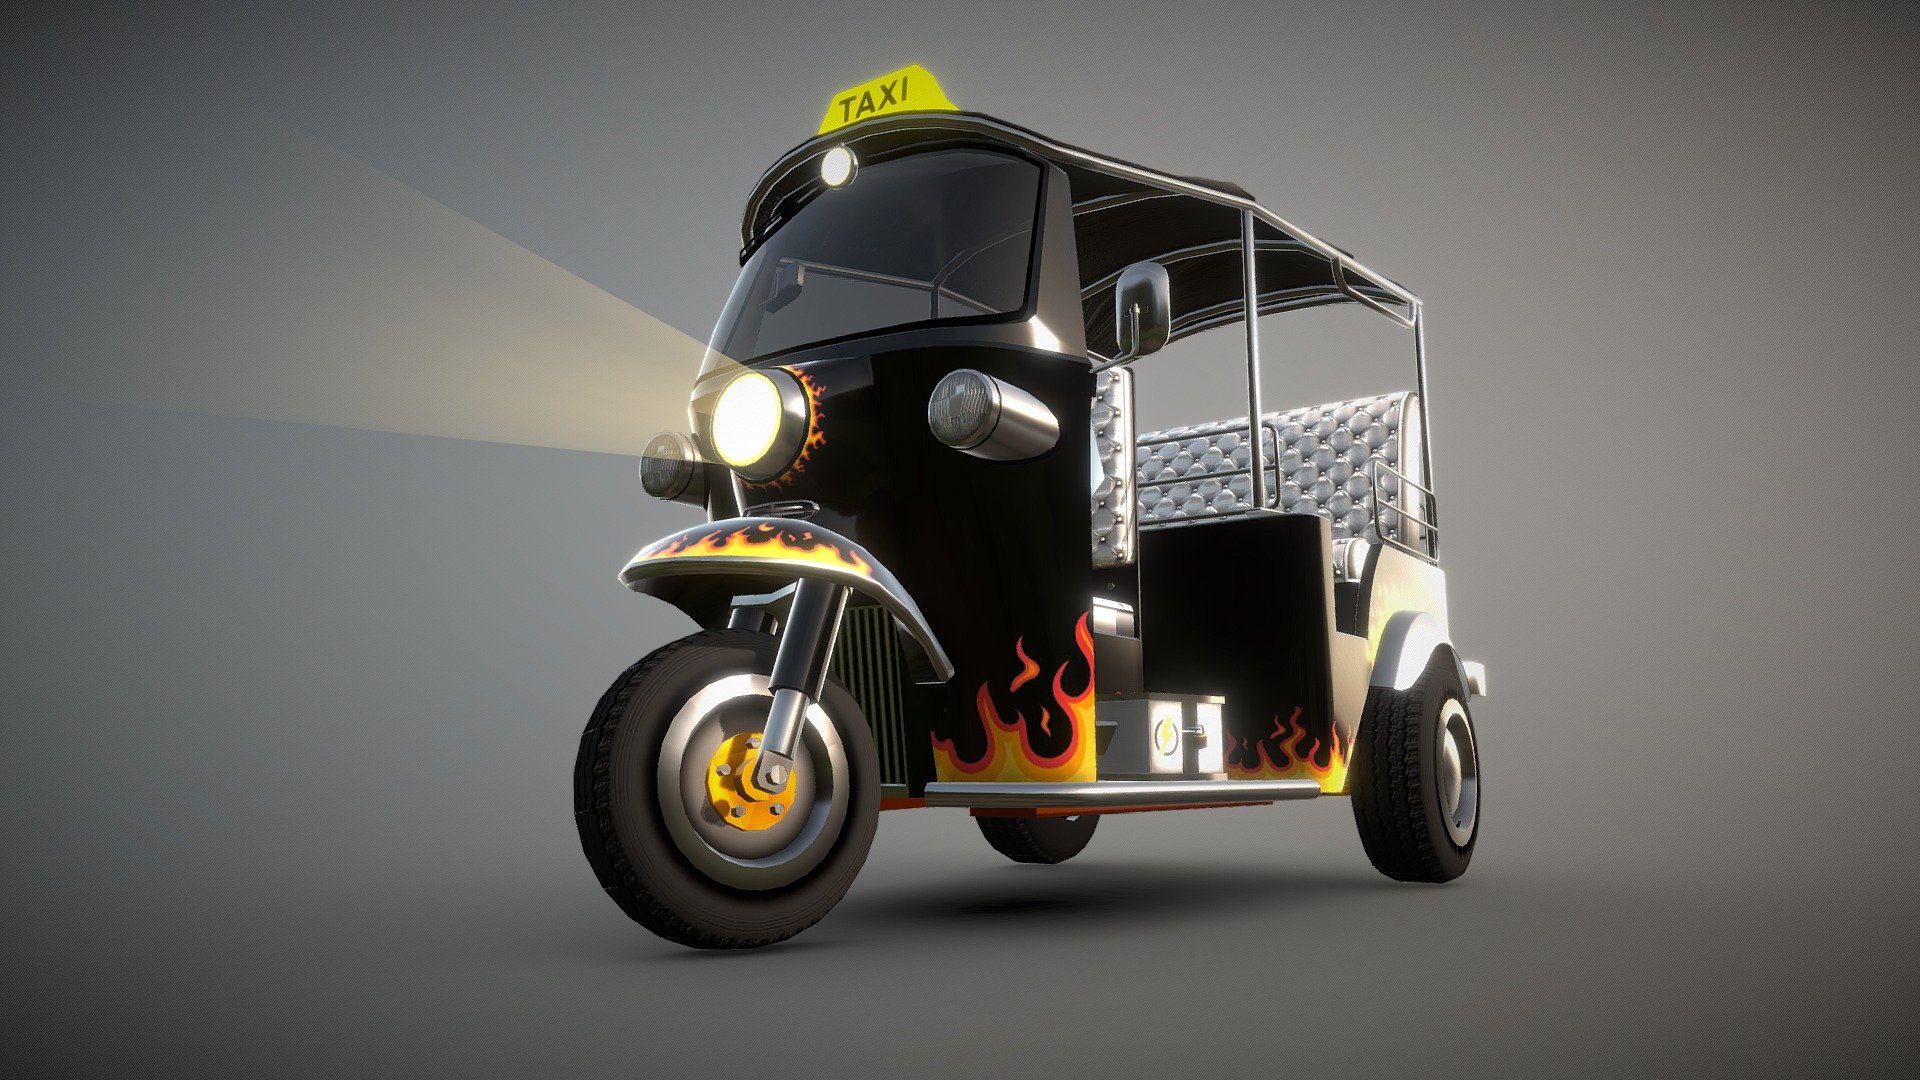 Low poly model for mobile game with interrior and moving parts
8k verts
14k triangles
8k polygons
Textures 256x256 to 2048x2048
Created in blender3d 2022, Photoshop 2022 - Auto Rickshaw 1980's - 3D model by OG Cars (@zigzag977010) 3d model